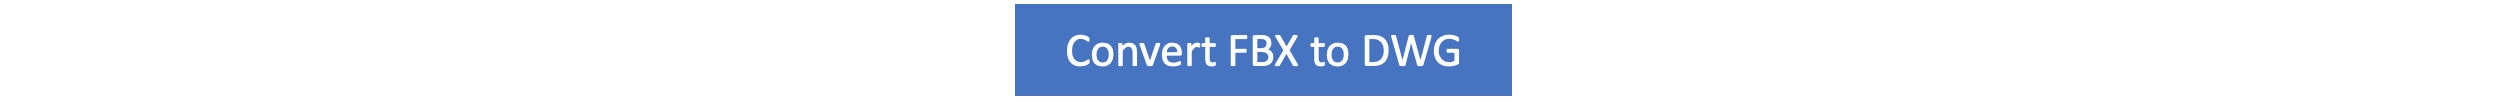 FBX to DWG